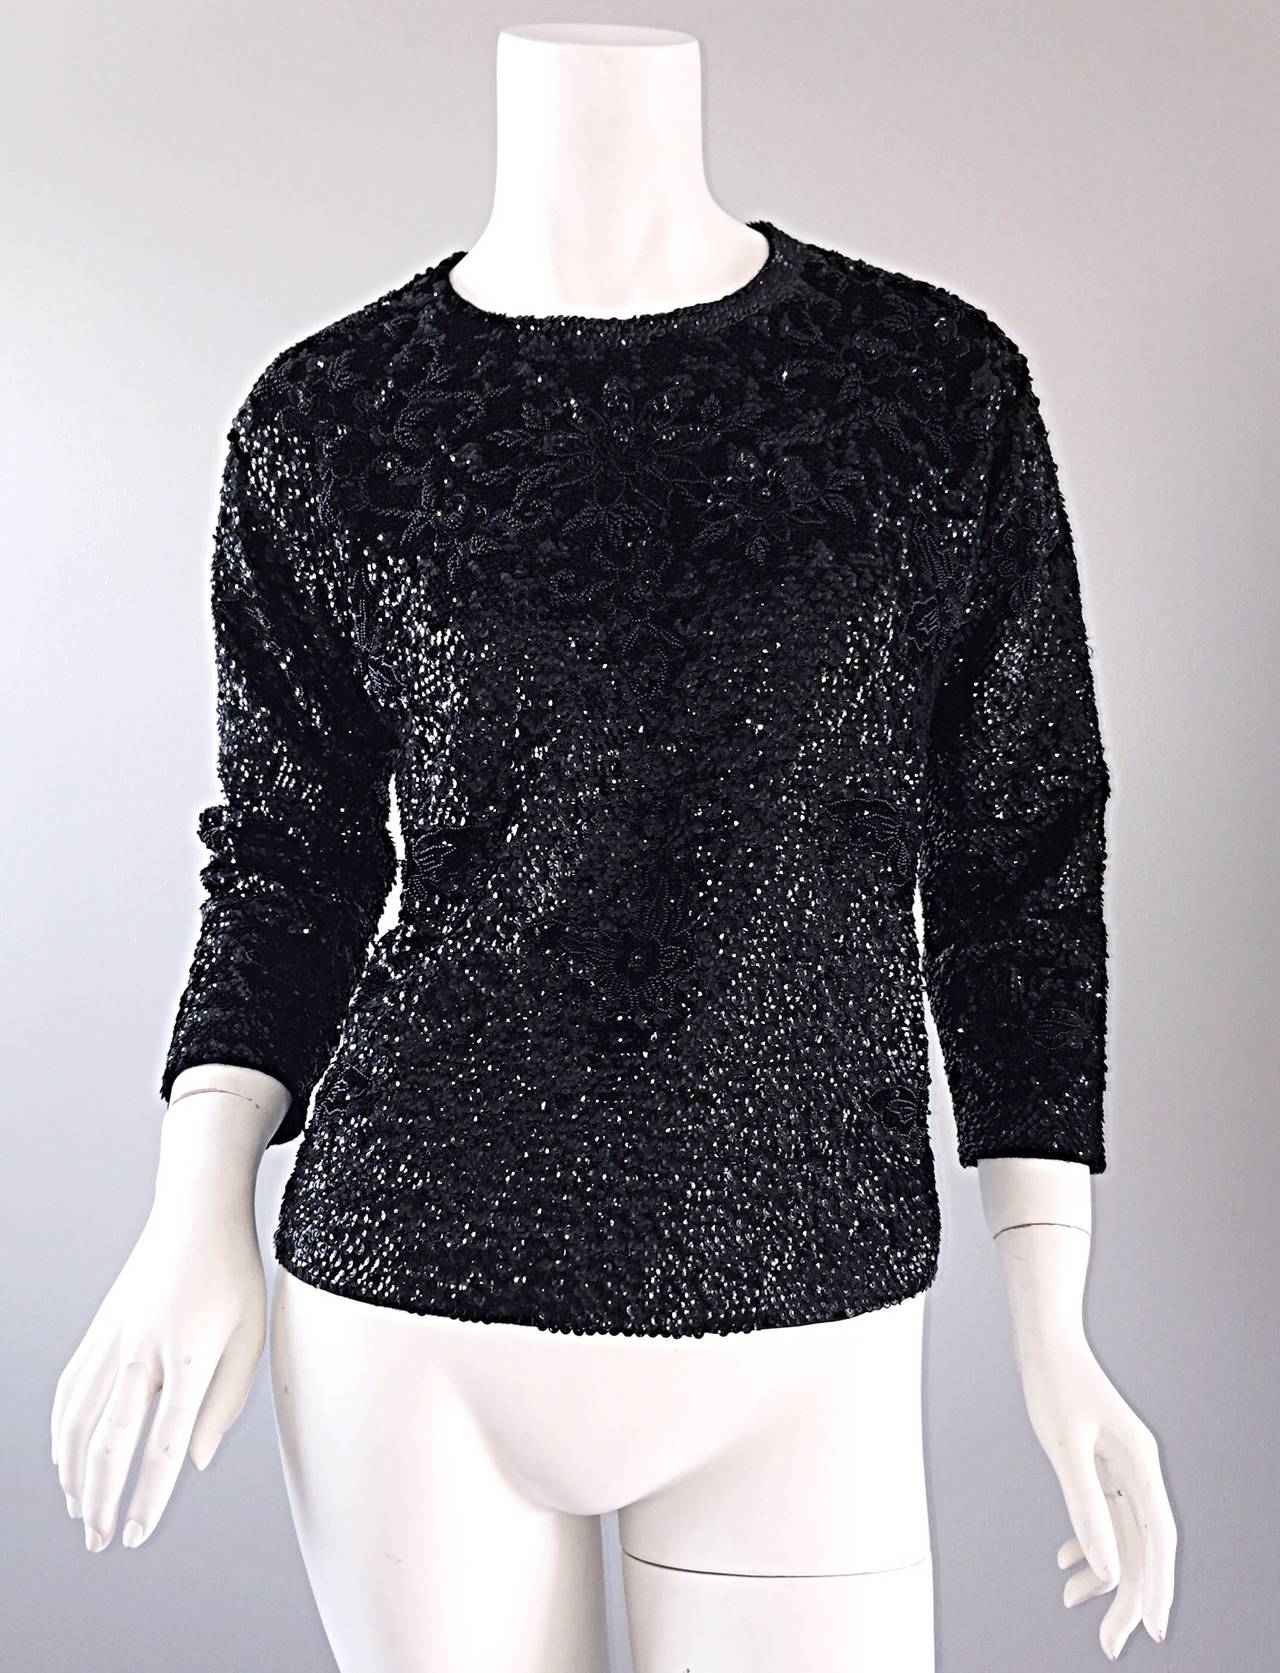 Beautiful vintage 1950s all-over sequin and beaded black wool sweater! Words cannot even begin to describe the beauty of this sweater! Intricate beadwork, with floral design at bust. Full metal zipper up the back. Looks great with jeans, trousers, a